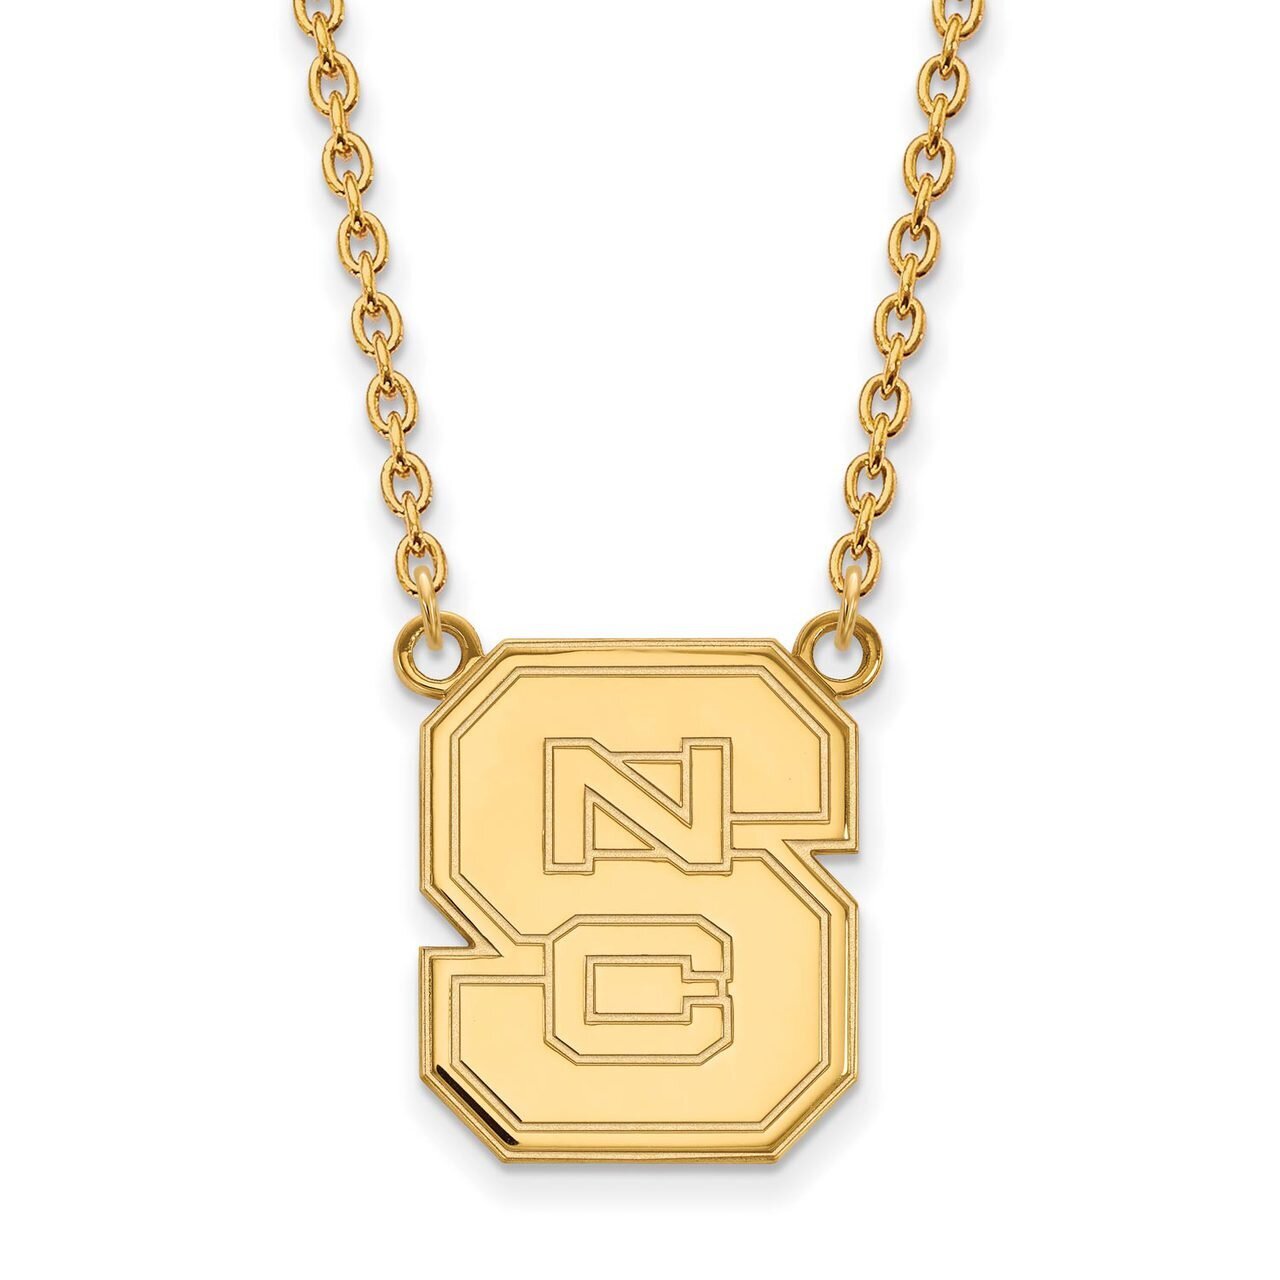 North Carolina State University Large Pendant with Chain Necklace 10k Yellow Gold 1Y016NCS-18